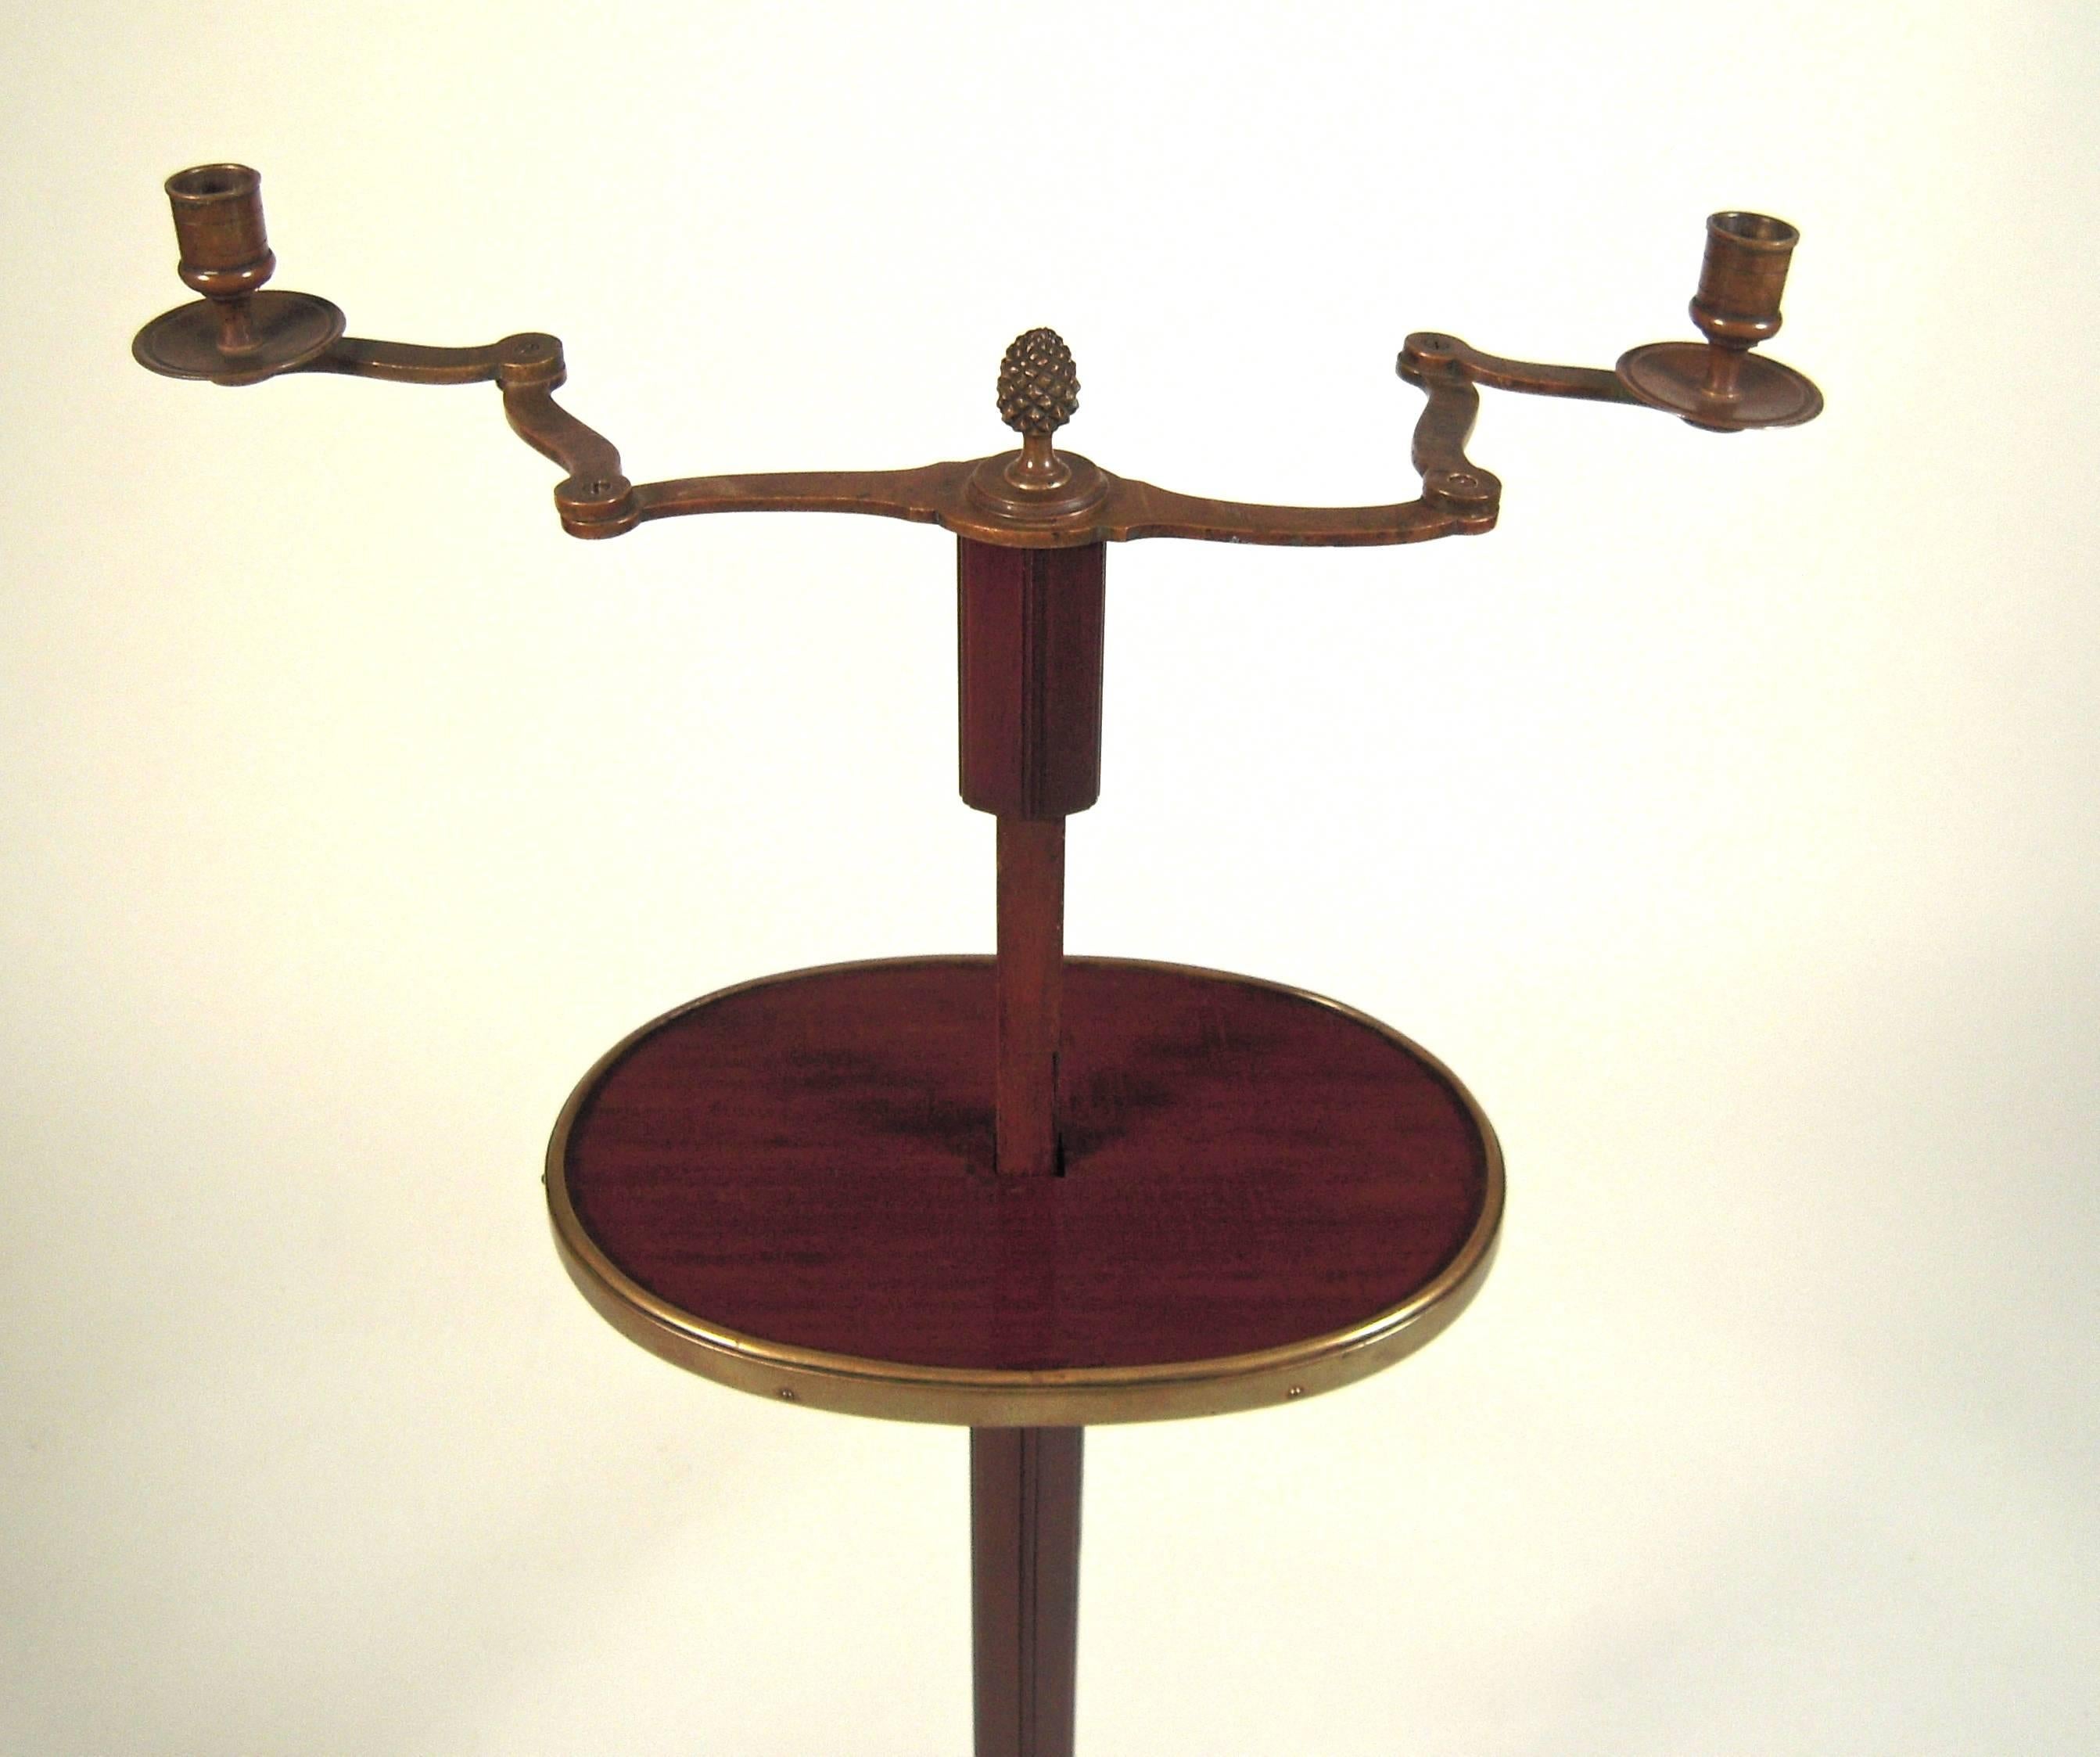 An unusual, charming and quirky Edwardian, adjustable height, two-light mahogany and brass candle Stand or drinks table, English, circa 1910, with brass pineapple finial over two adjustable candle arms above a brass bound mahogany oval shelf,